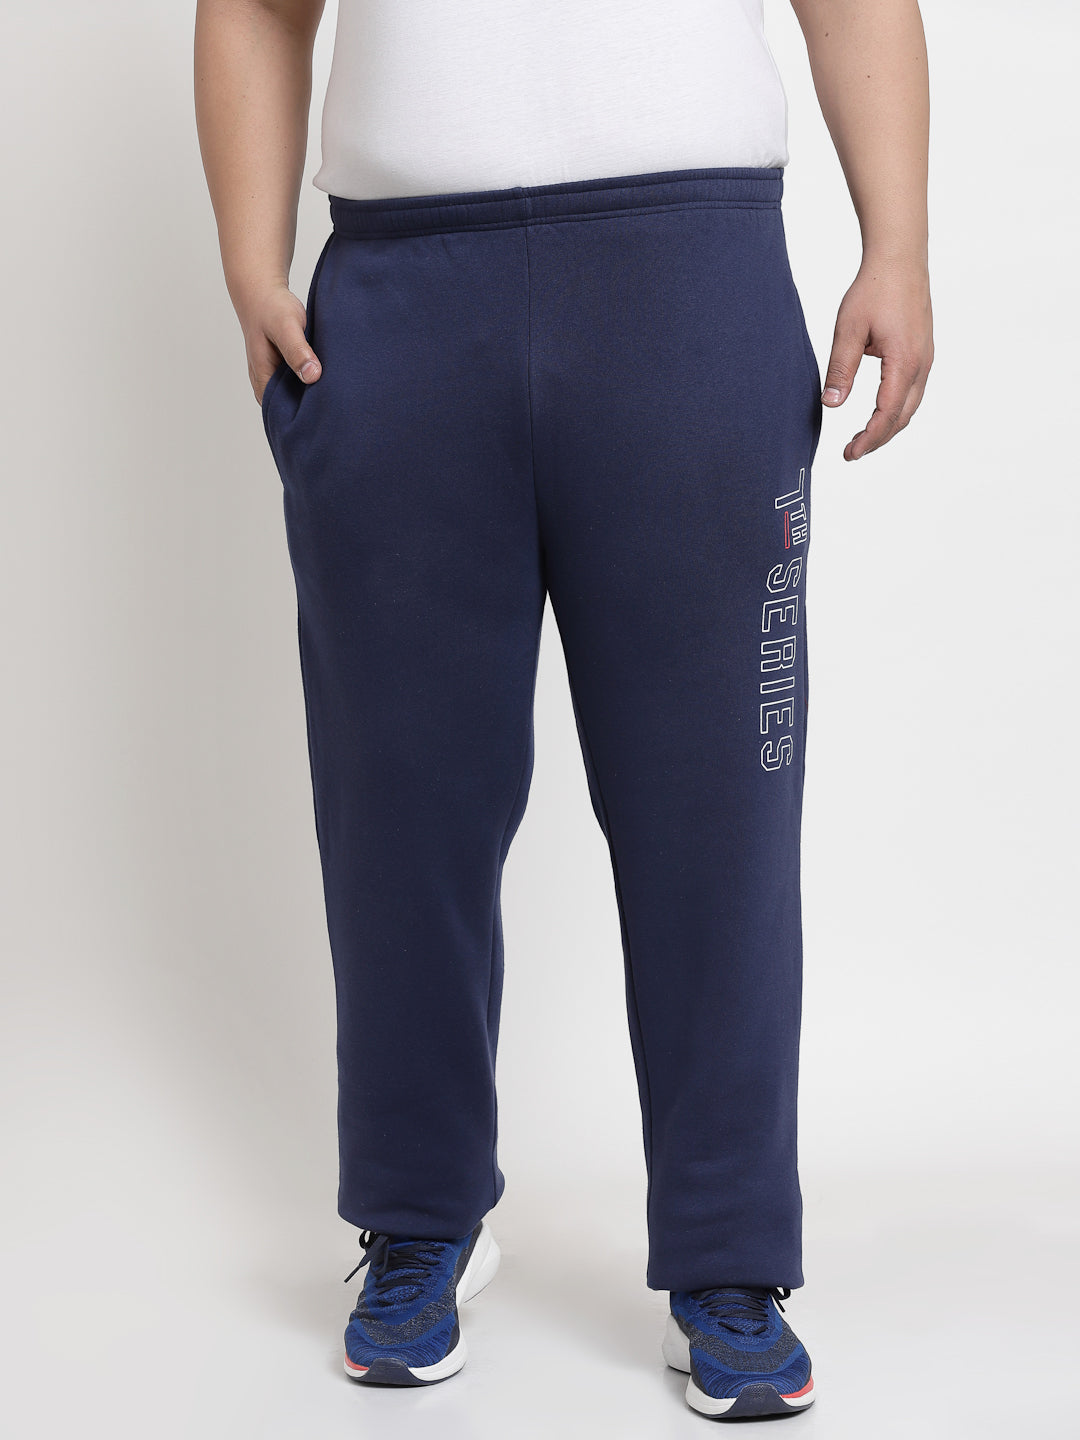 STAR THE VISION Solid Men Blue Track Pants - Buy STAR THE VISION Solid Men Blue  Track Pants Online at Best Prices in India | Flipkart.com